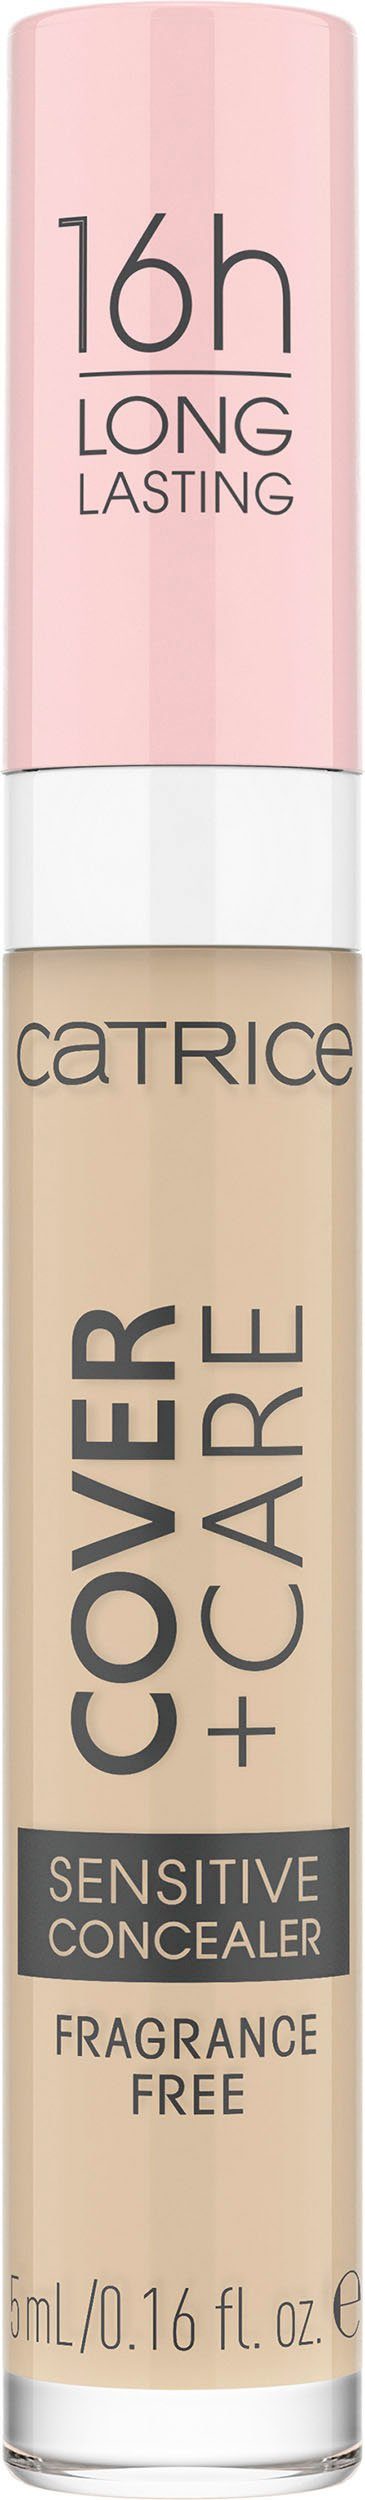 Concealer Catrice Care Sensitive Concealer, 3-tlg. 010C Cover + Catrice nude